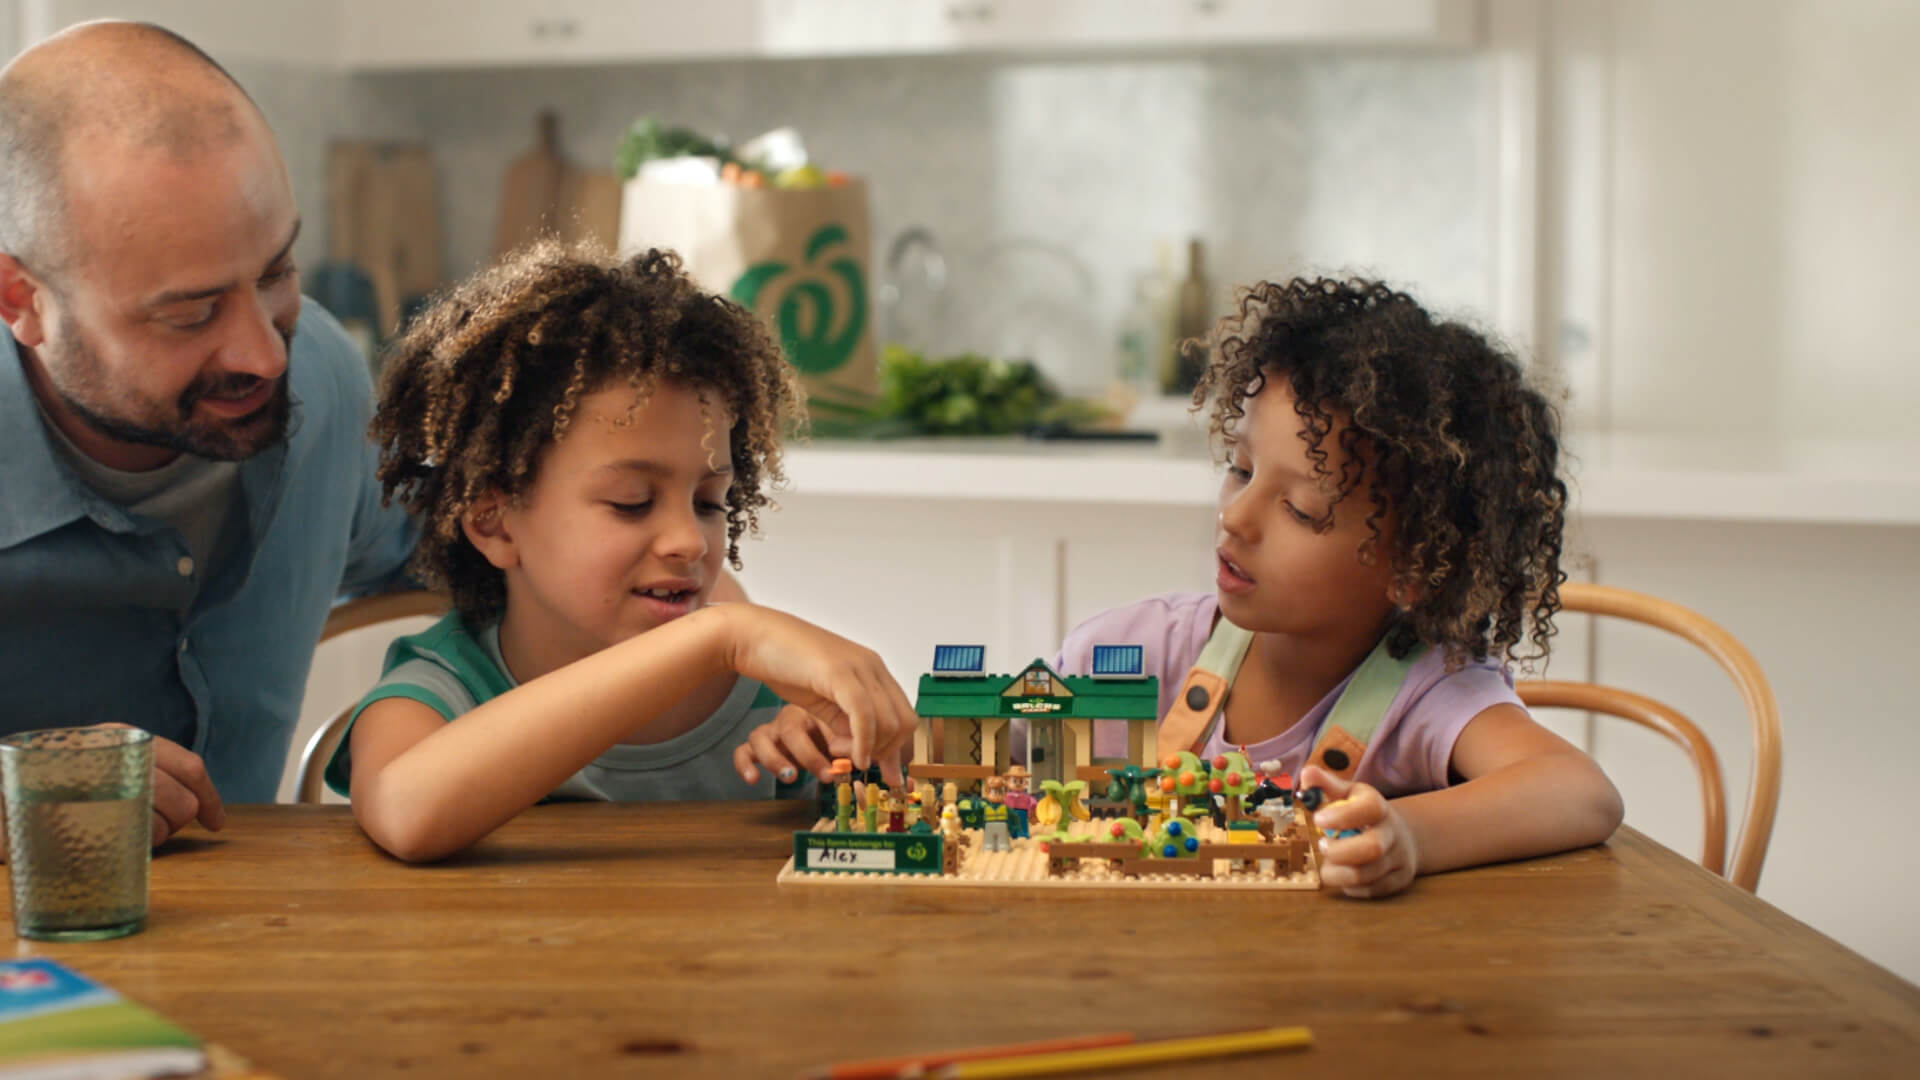 Image showing Woolworths Bricks Farm animation from television advertisement of two kids playing bricks at a kitchen table.